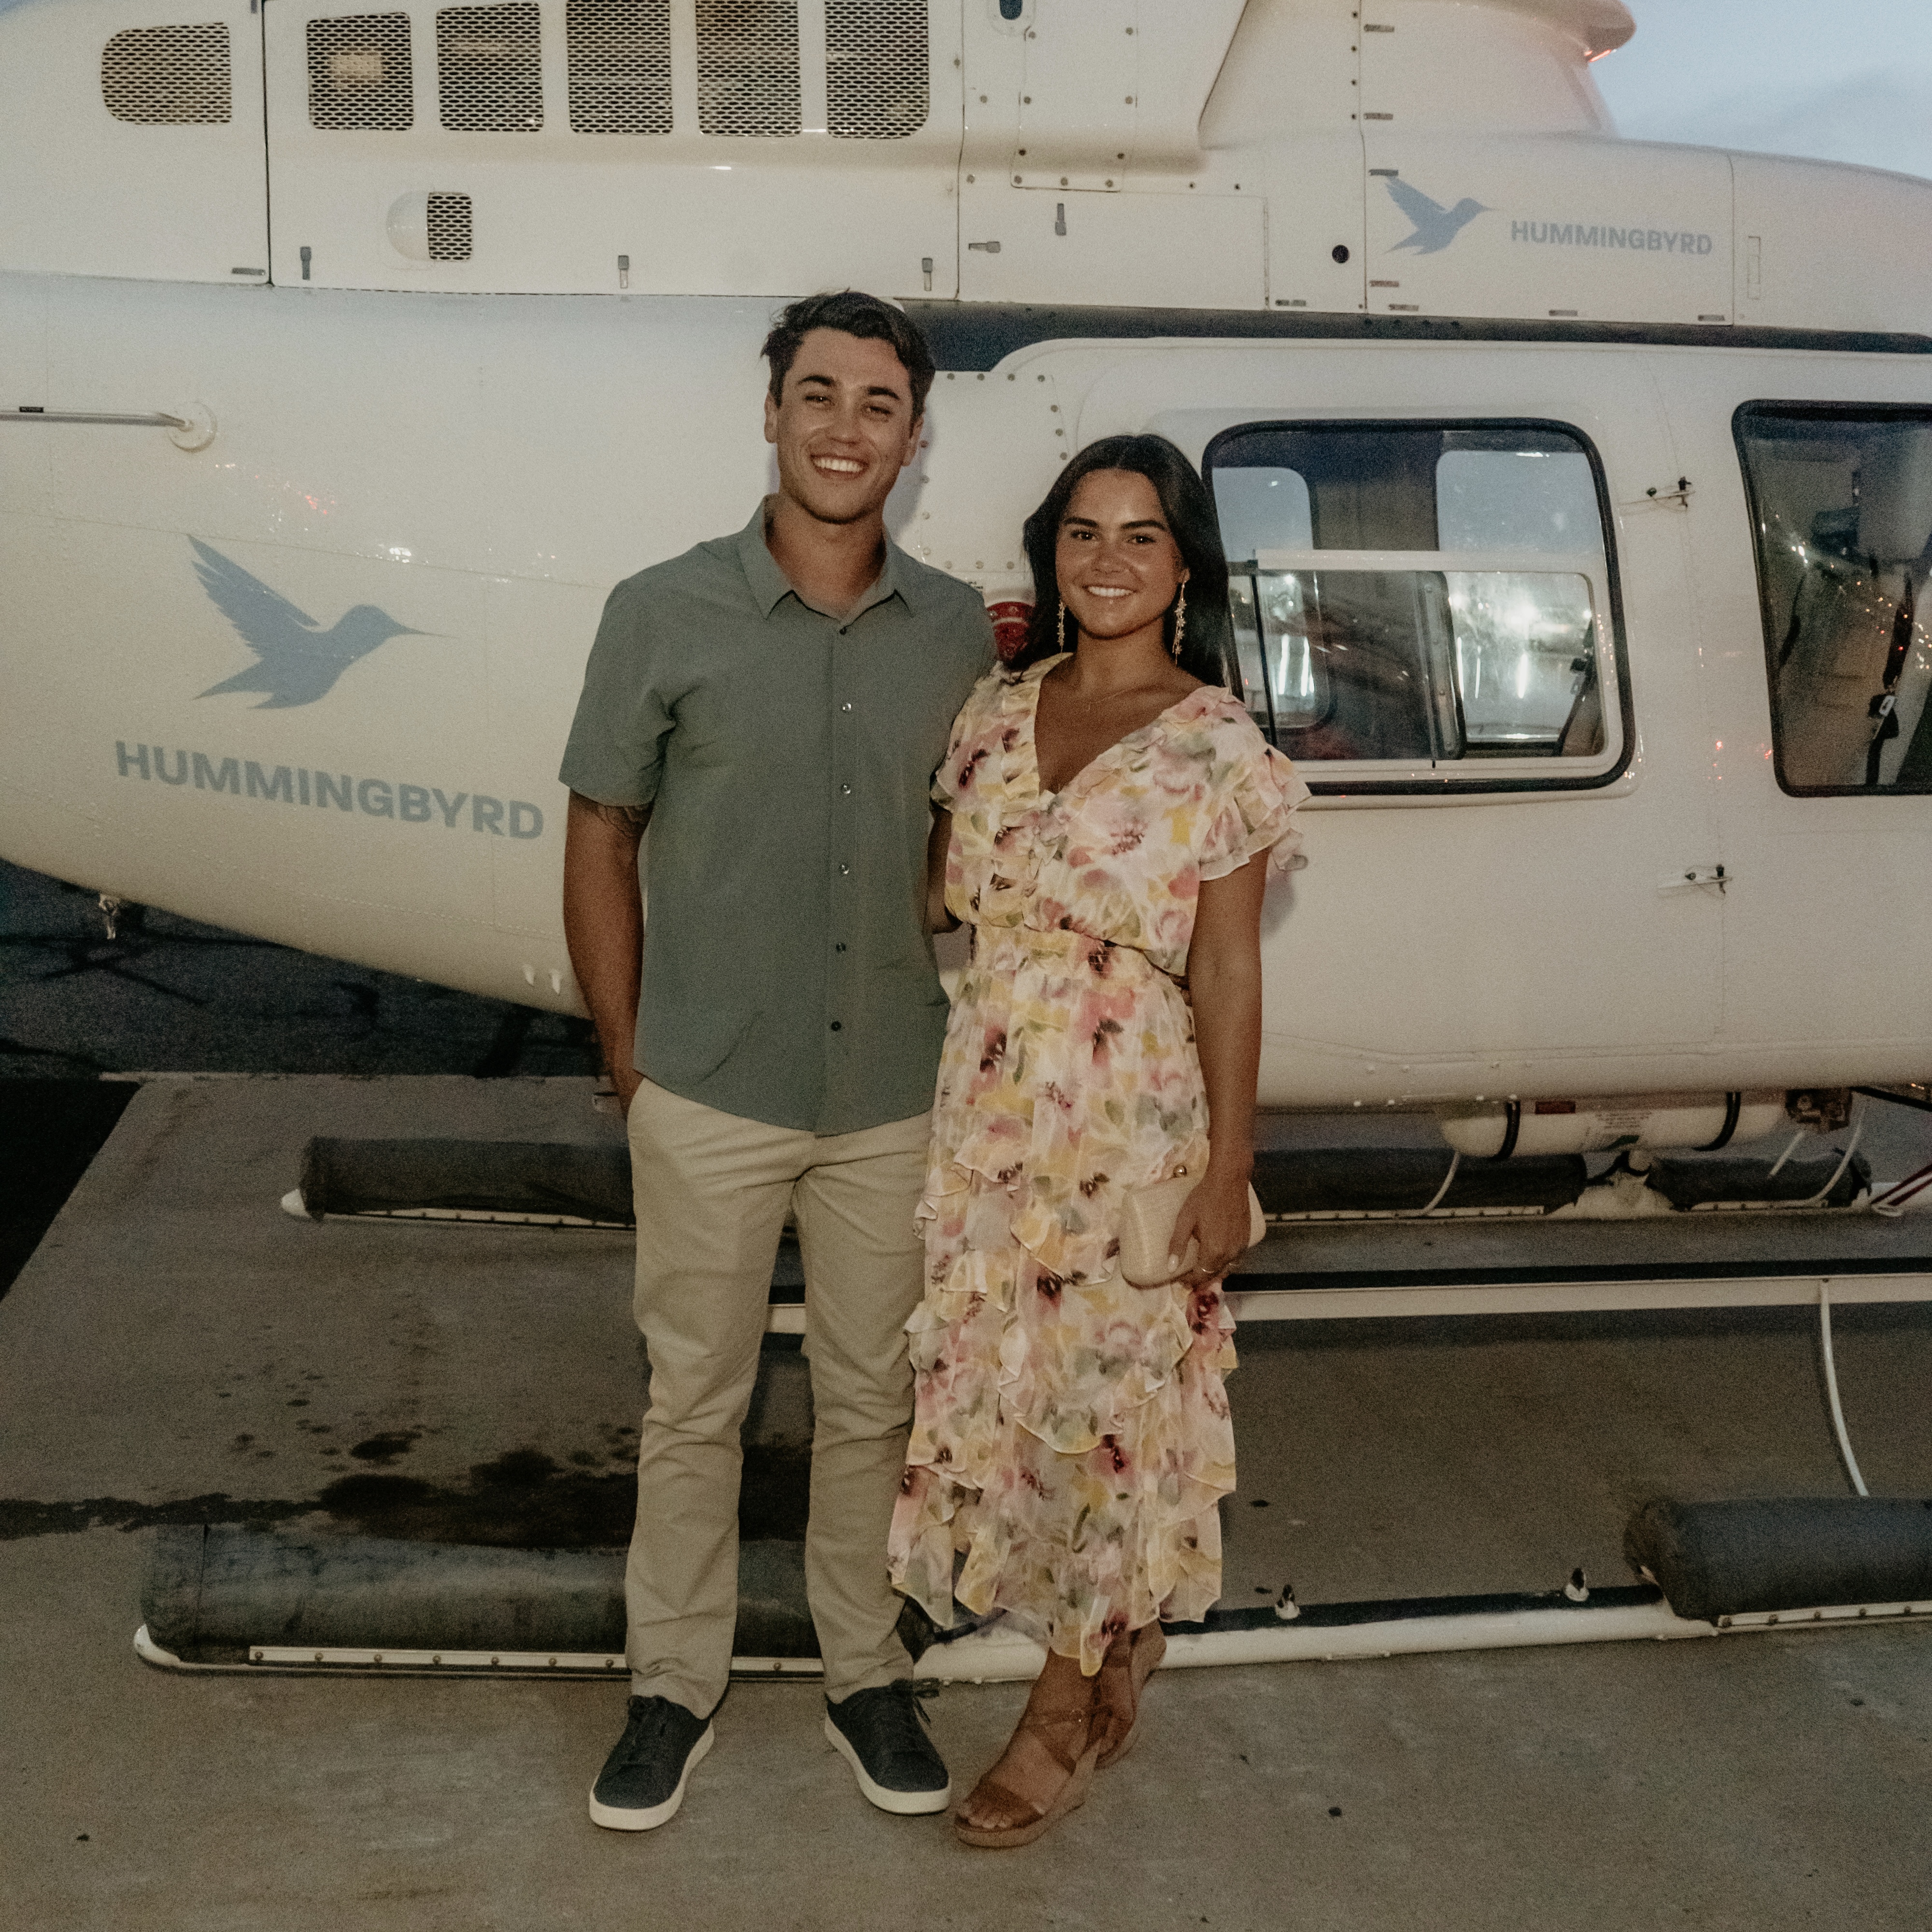 Sky-High Romance: A Helicopter Date Night Over New York City